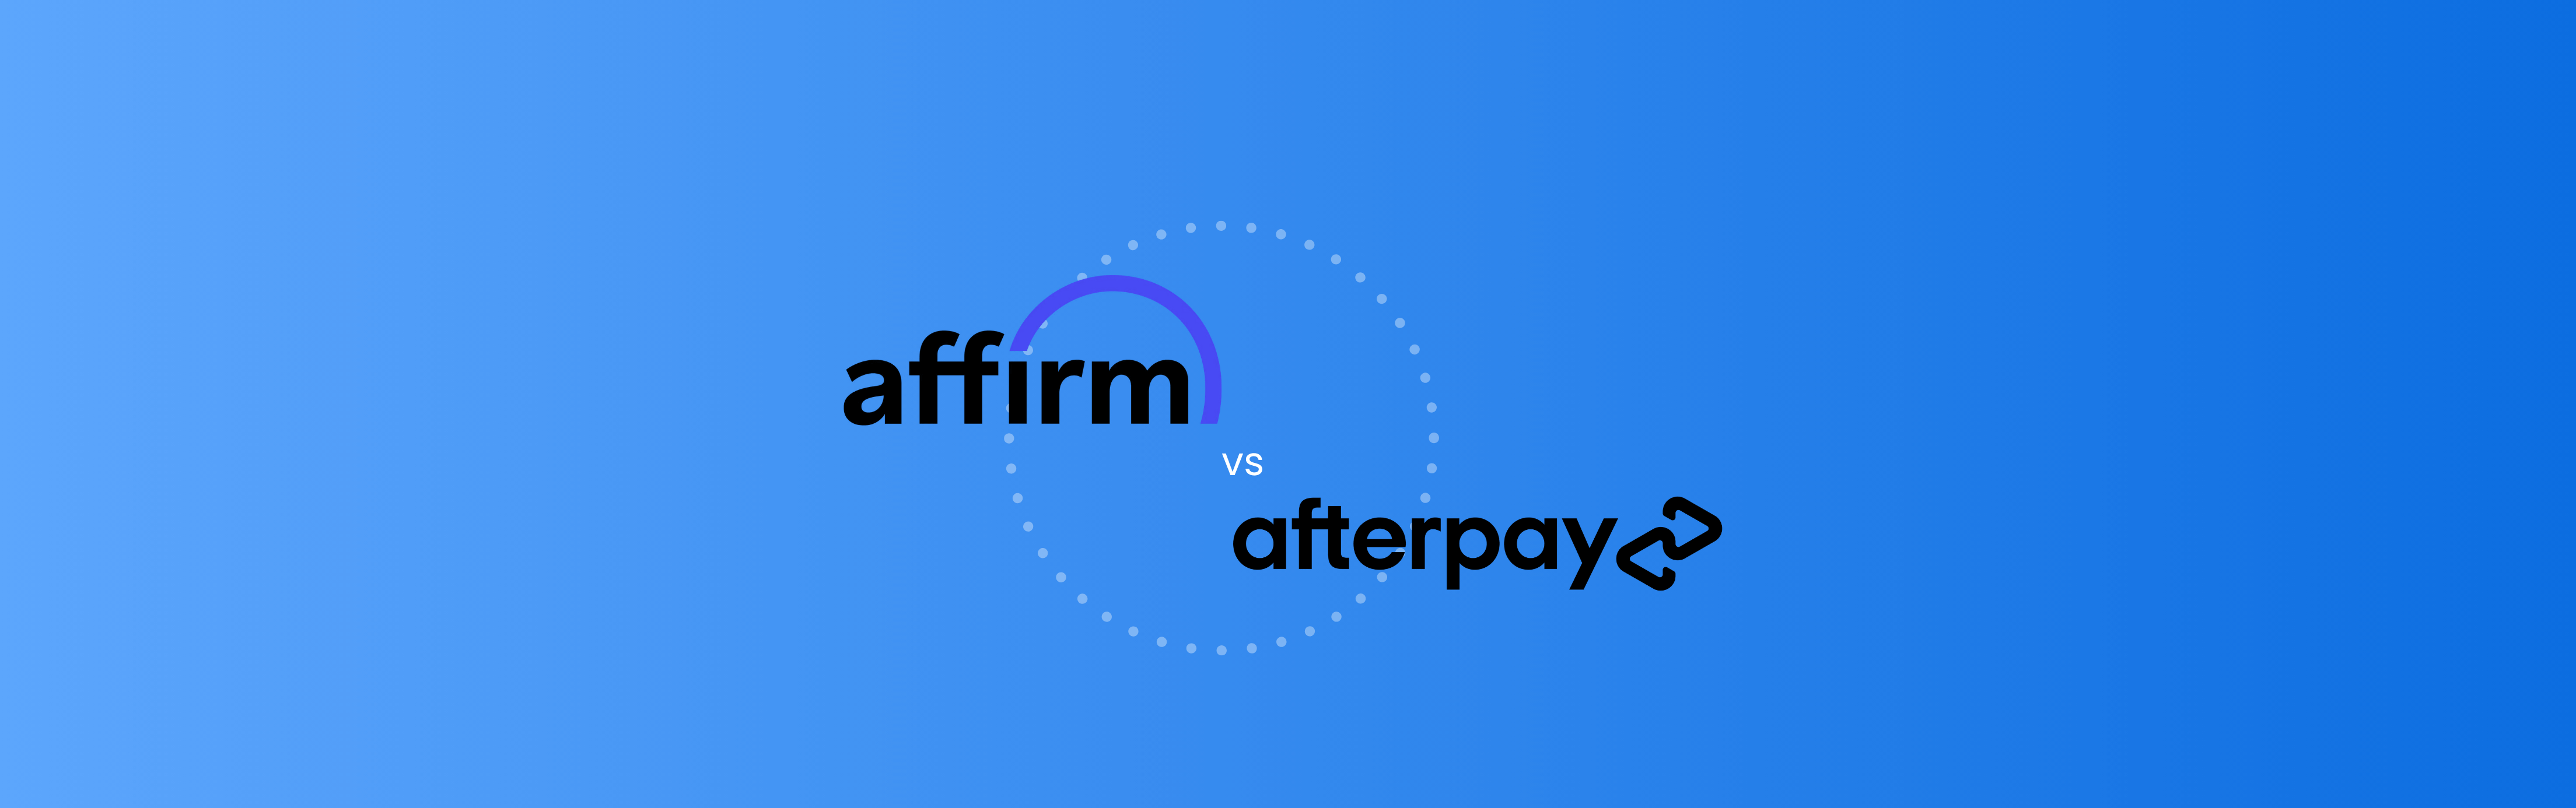 Affirm vs Afterpay: Exploring the Differences Between Buy Now, Pay Later Services